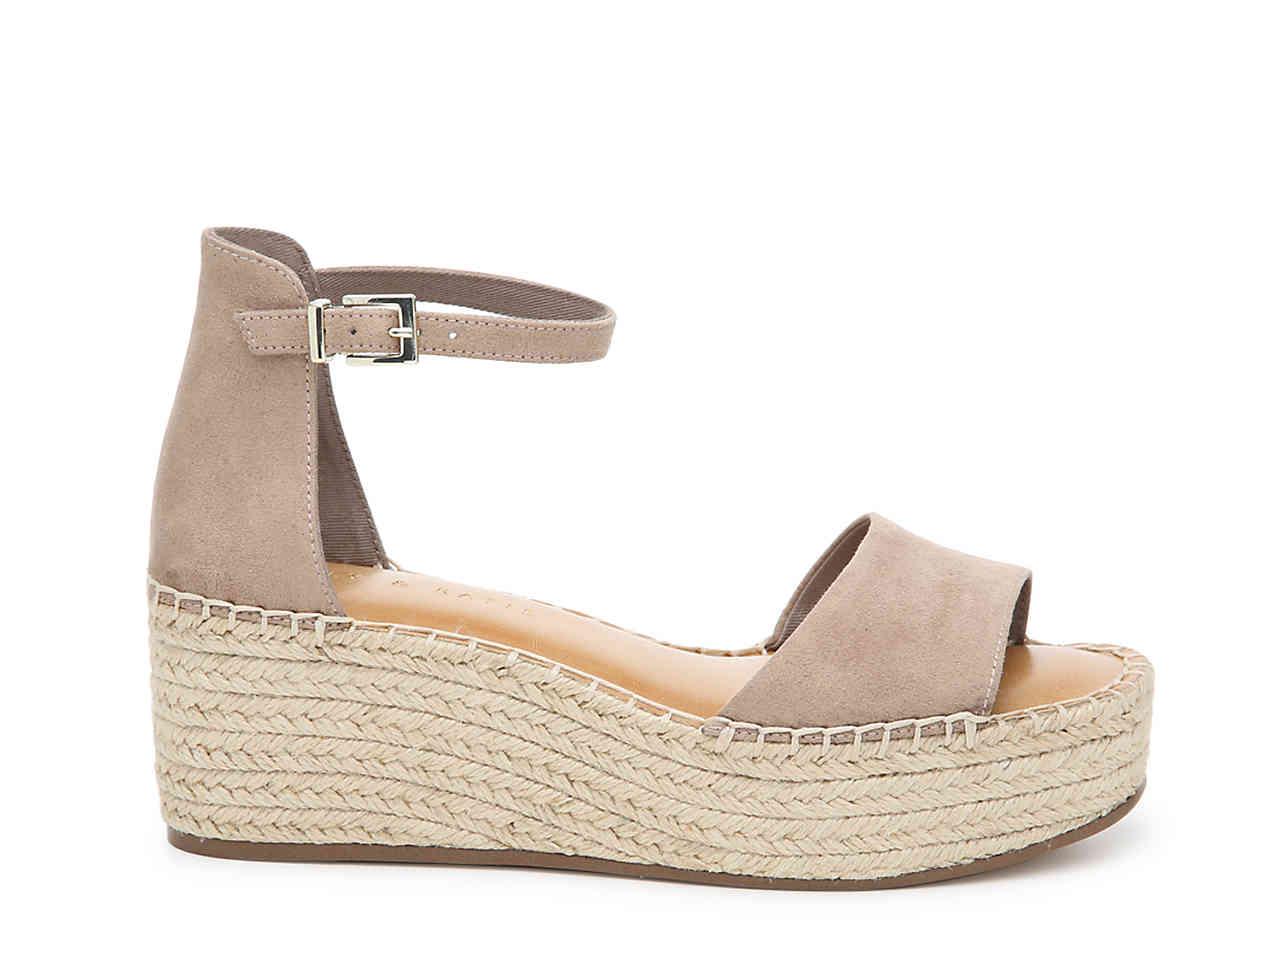 Kelly & Katie Synthetic Fedrick Espadrille Wedge Sandal in Natural - Lyst